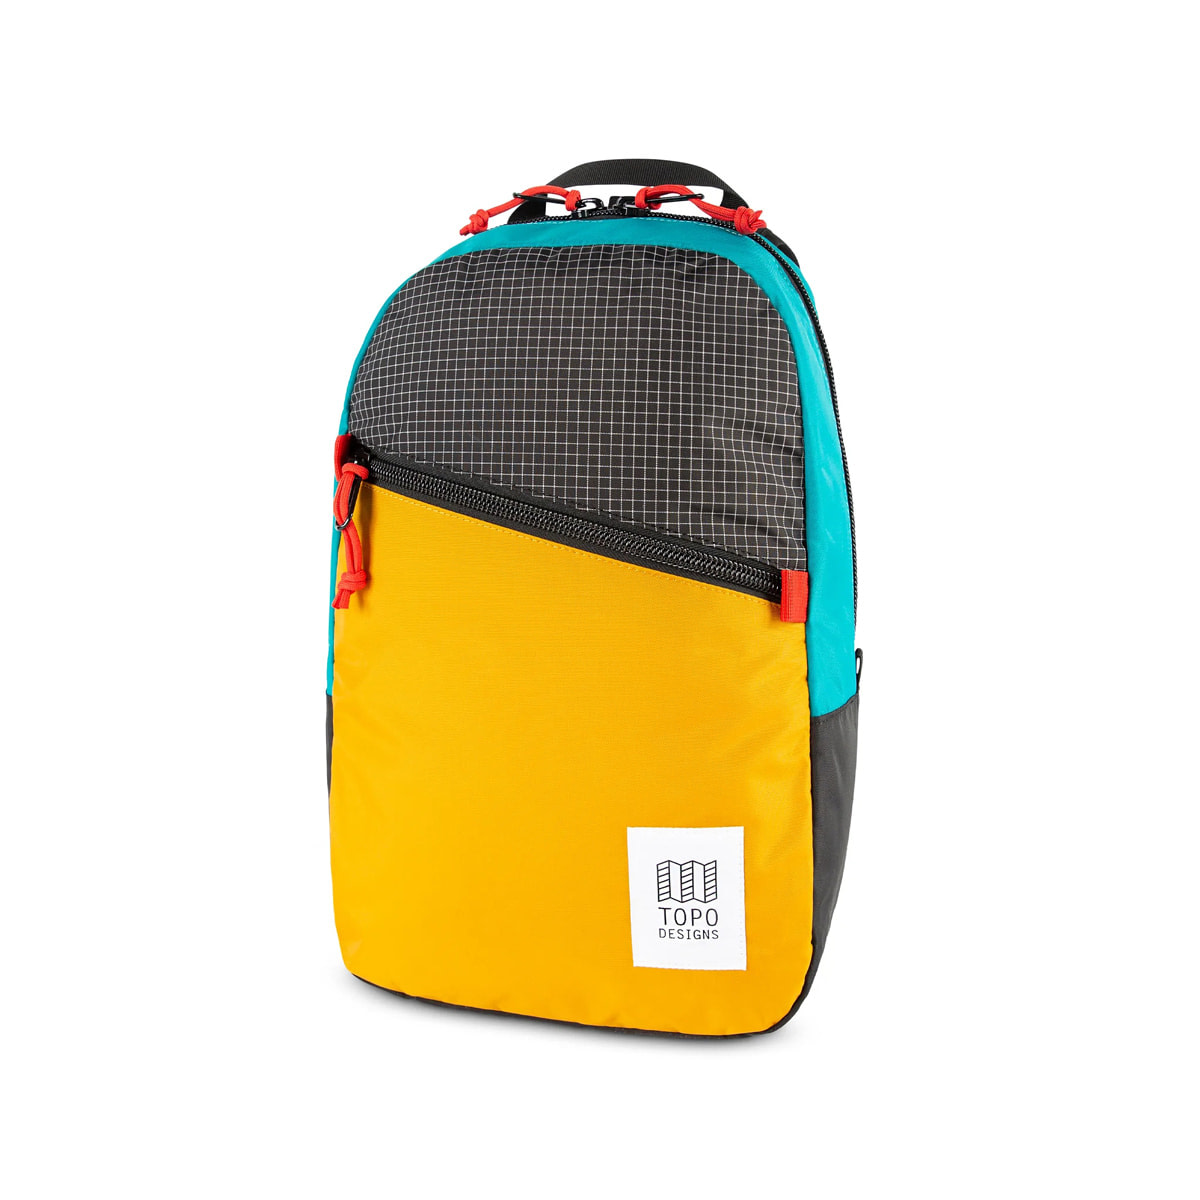 CLN - Light and durable backpack to accompany you this